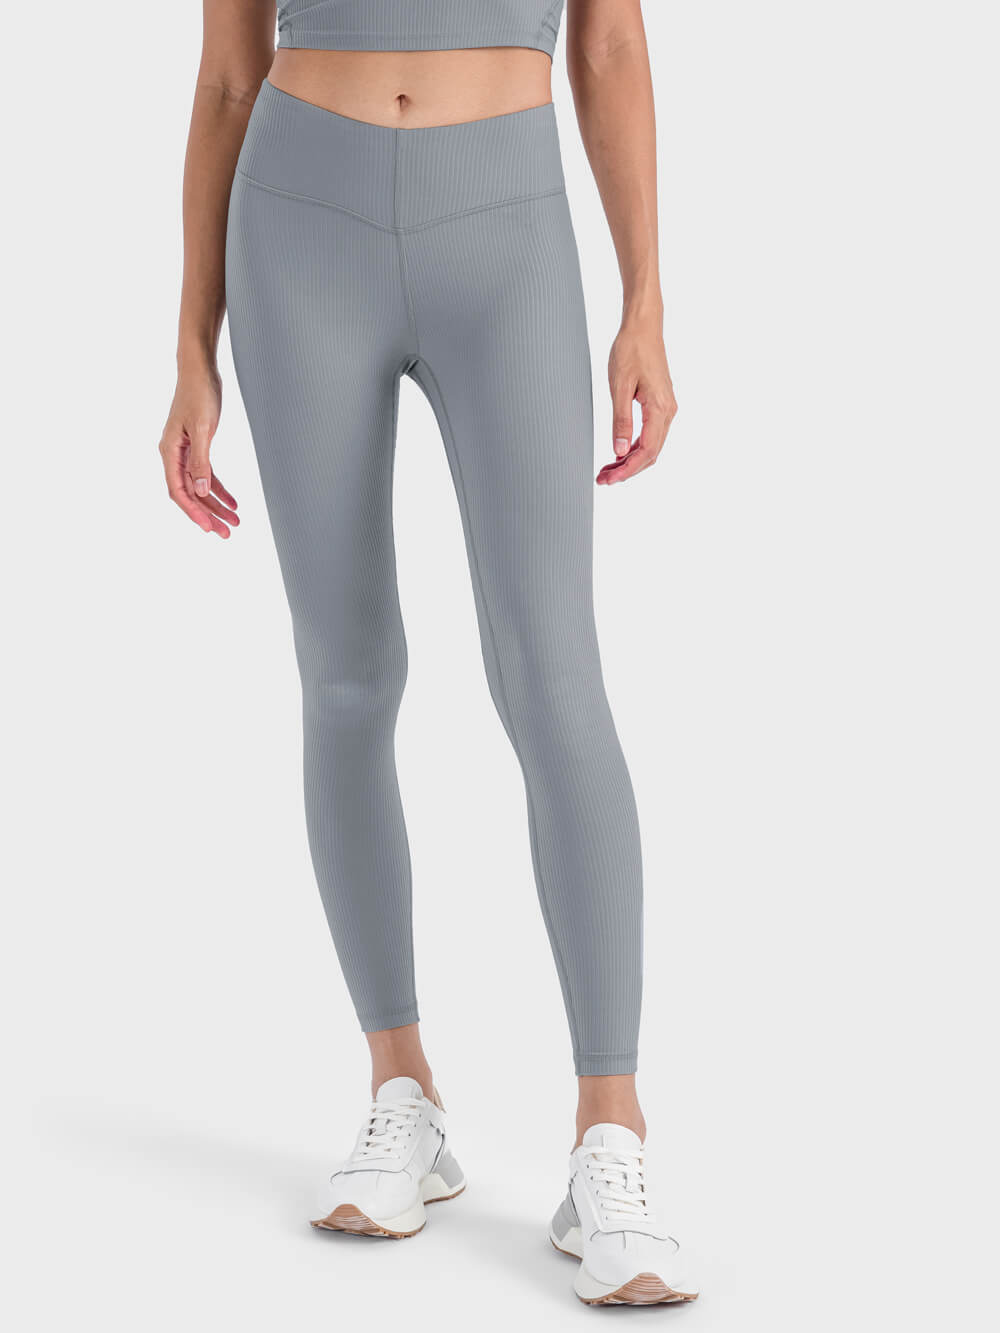 NEPOAGYM Workout Leggings with Hidden Scrunch,Tummy Control,Side